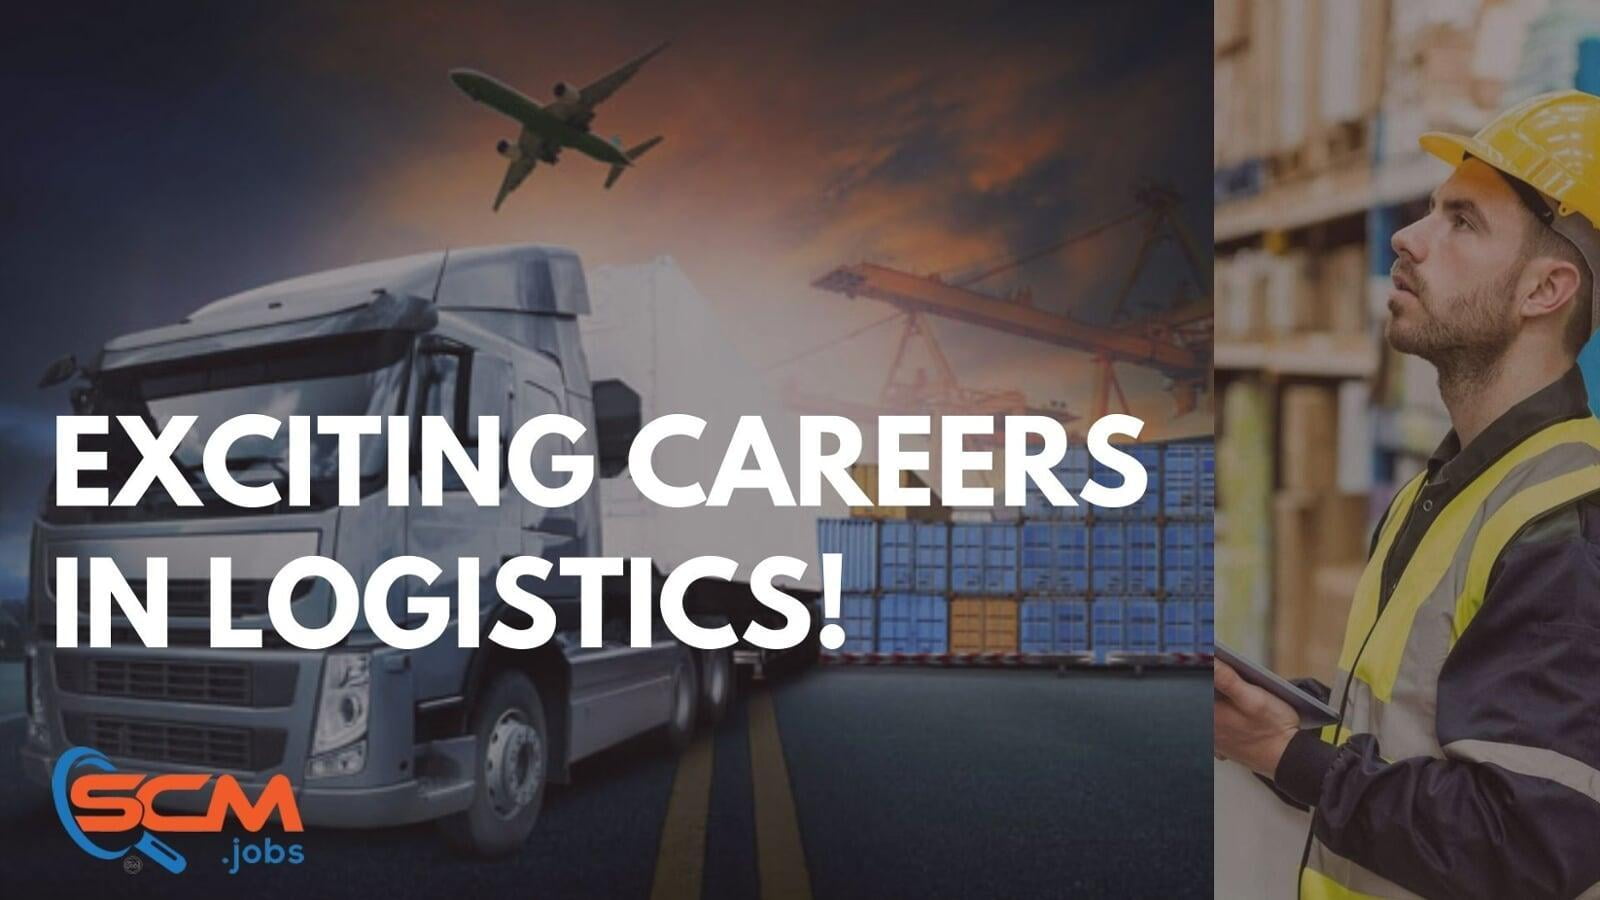 Supply Chain Management Jobs Training: Discover Exciting Careers in Logistics!